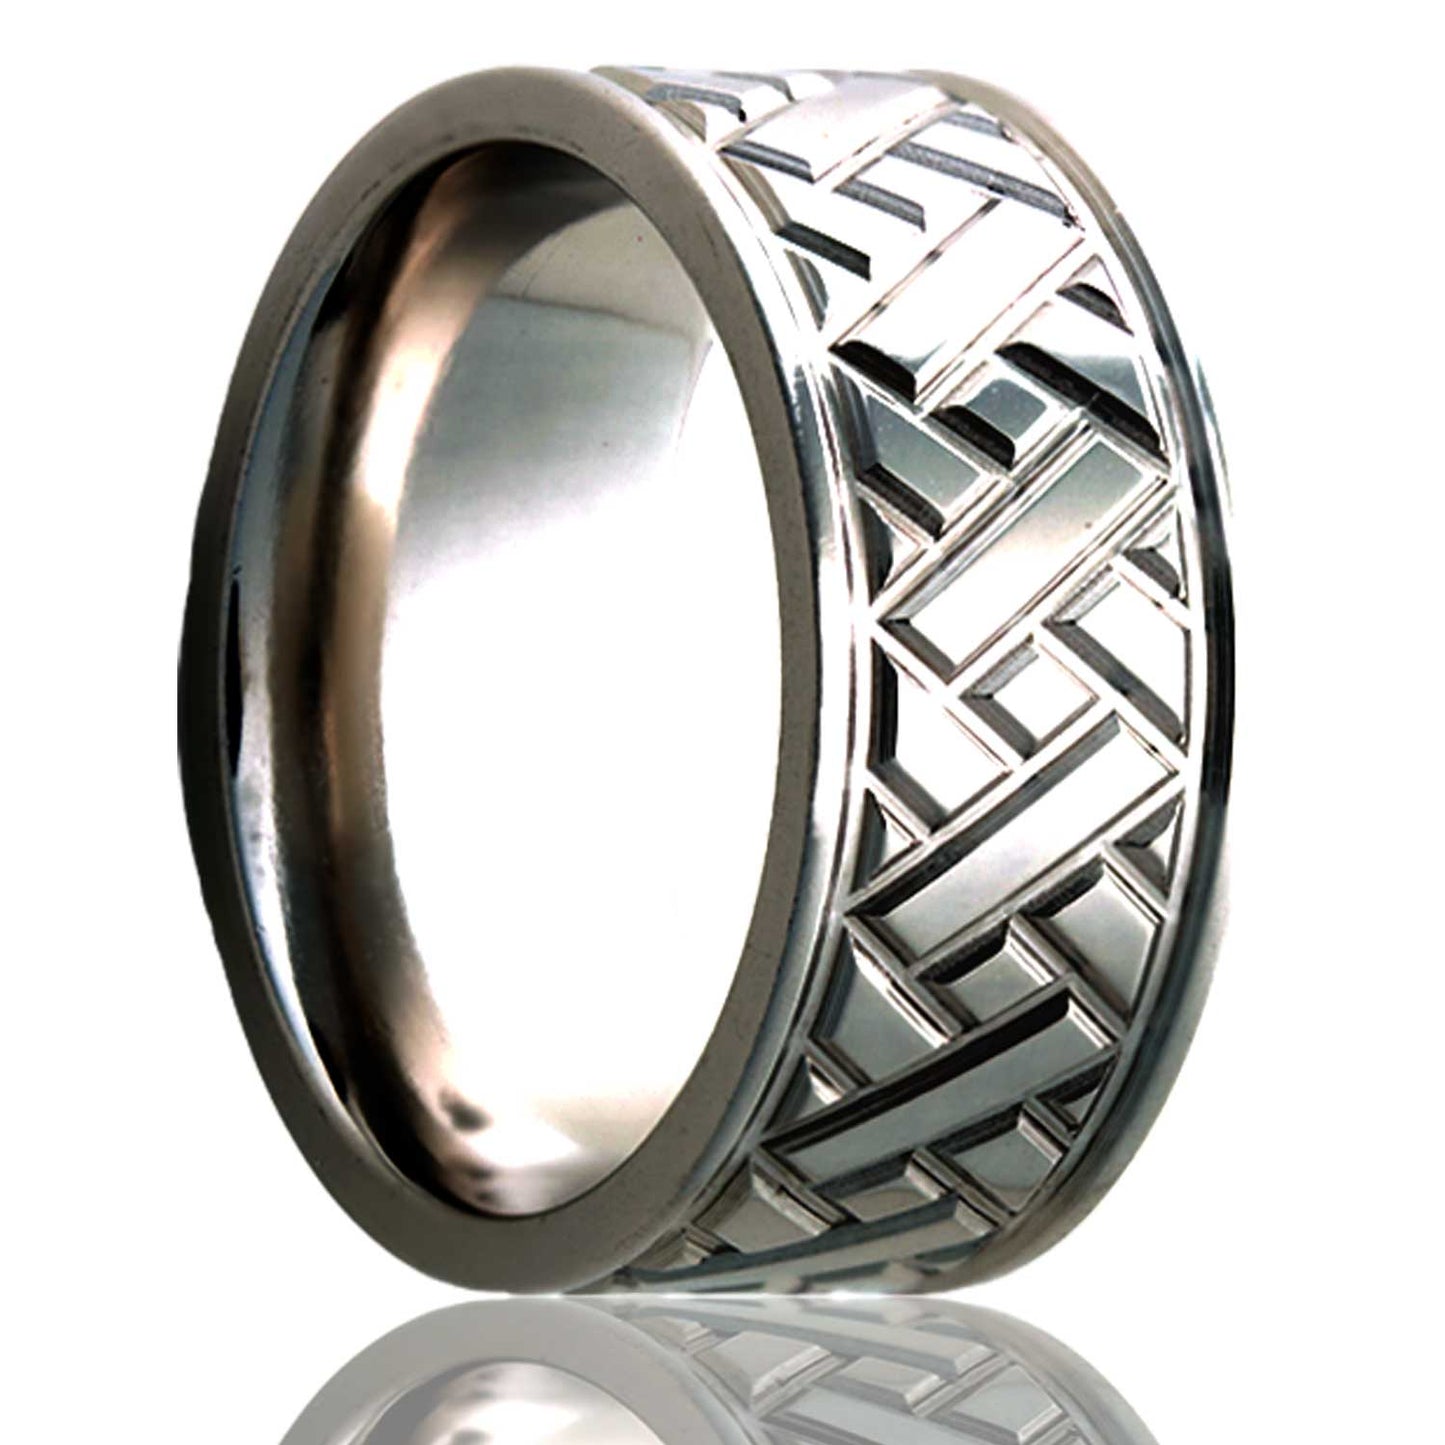 A grooved diagonal pattern cobalt wedding band displayed on a neutral white background.